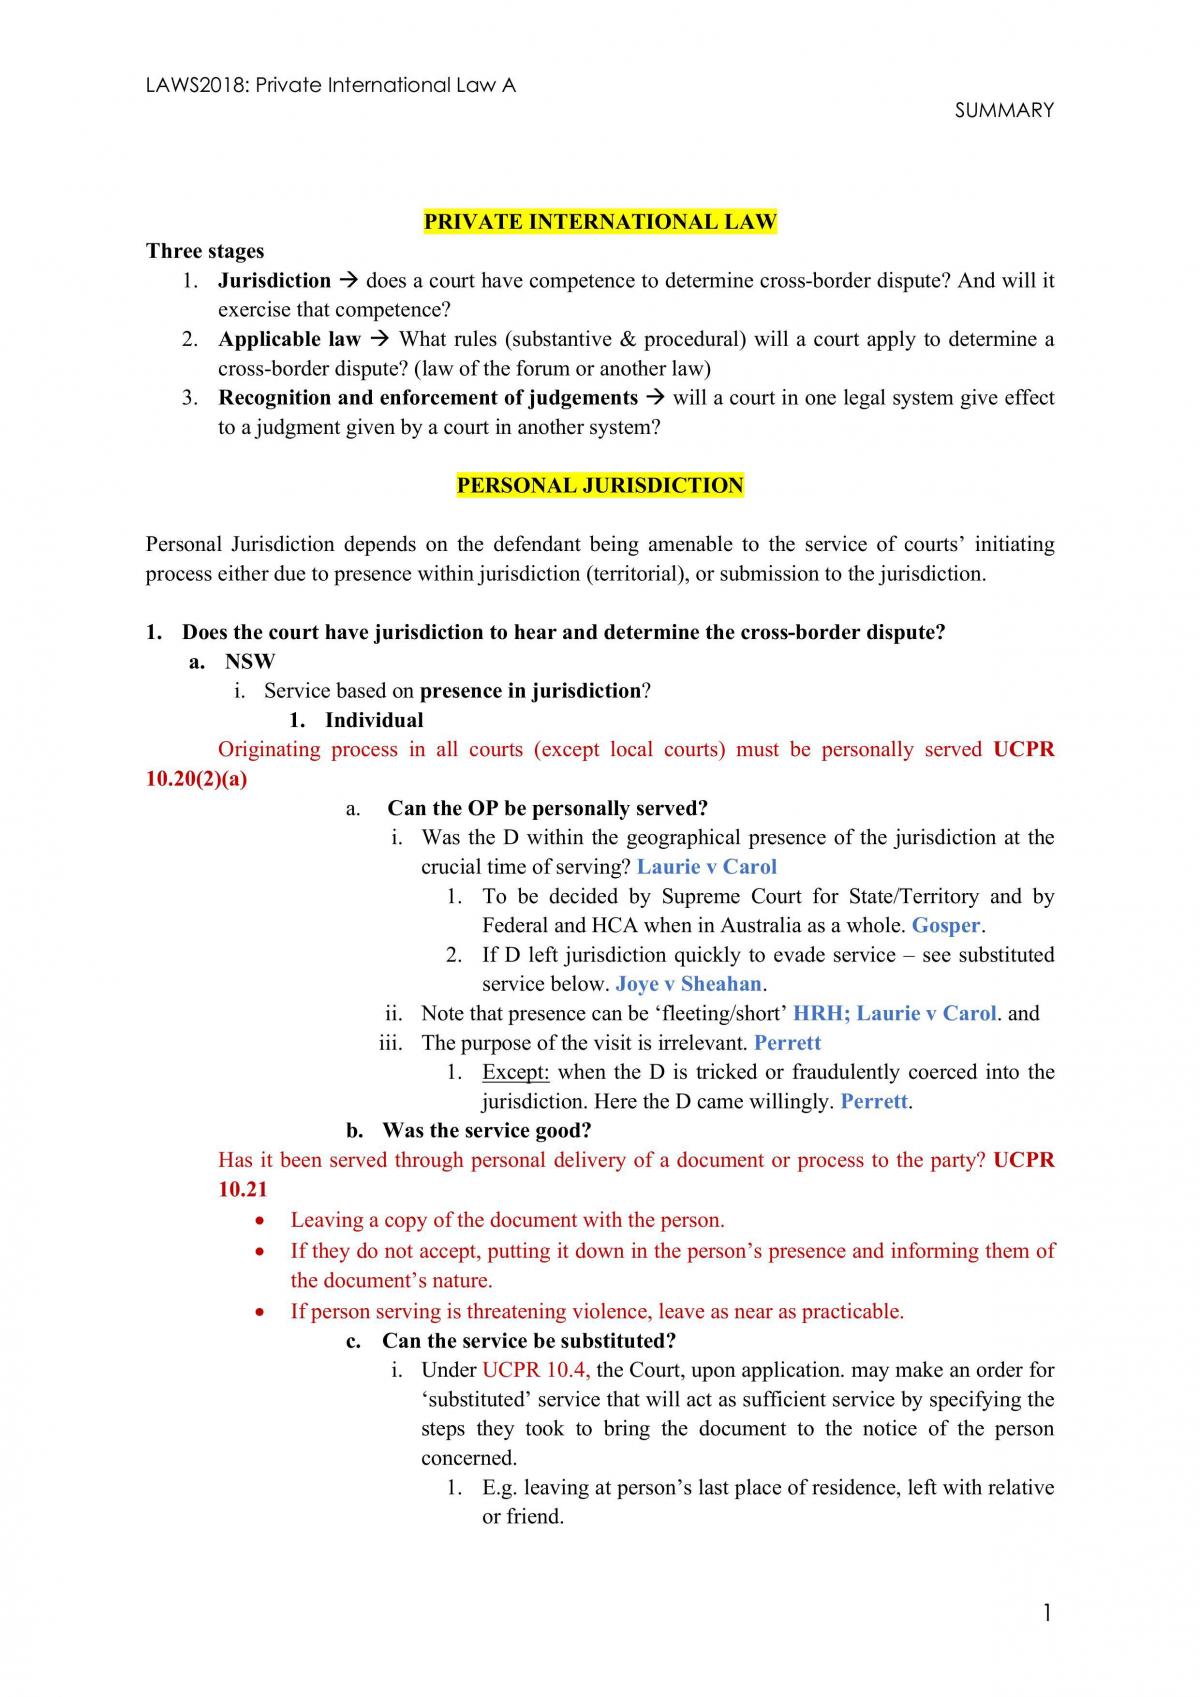 LAWS2018 PIL A Final Exam Summary - Page 1